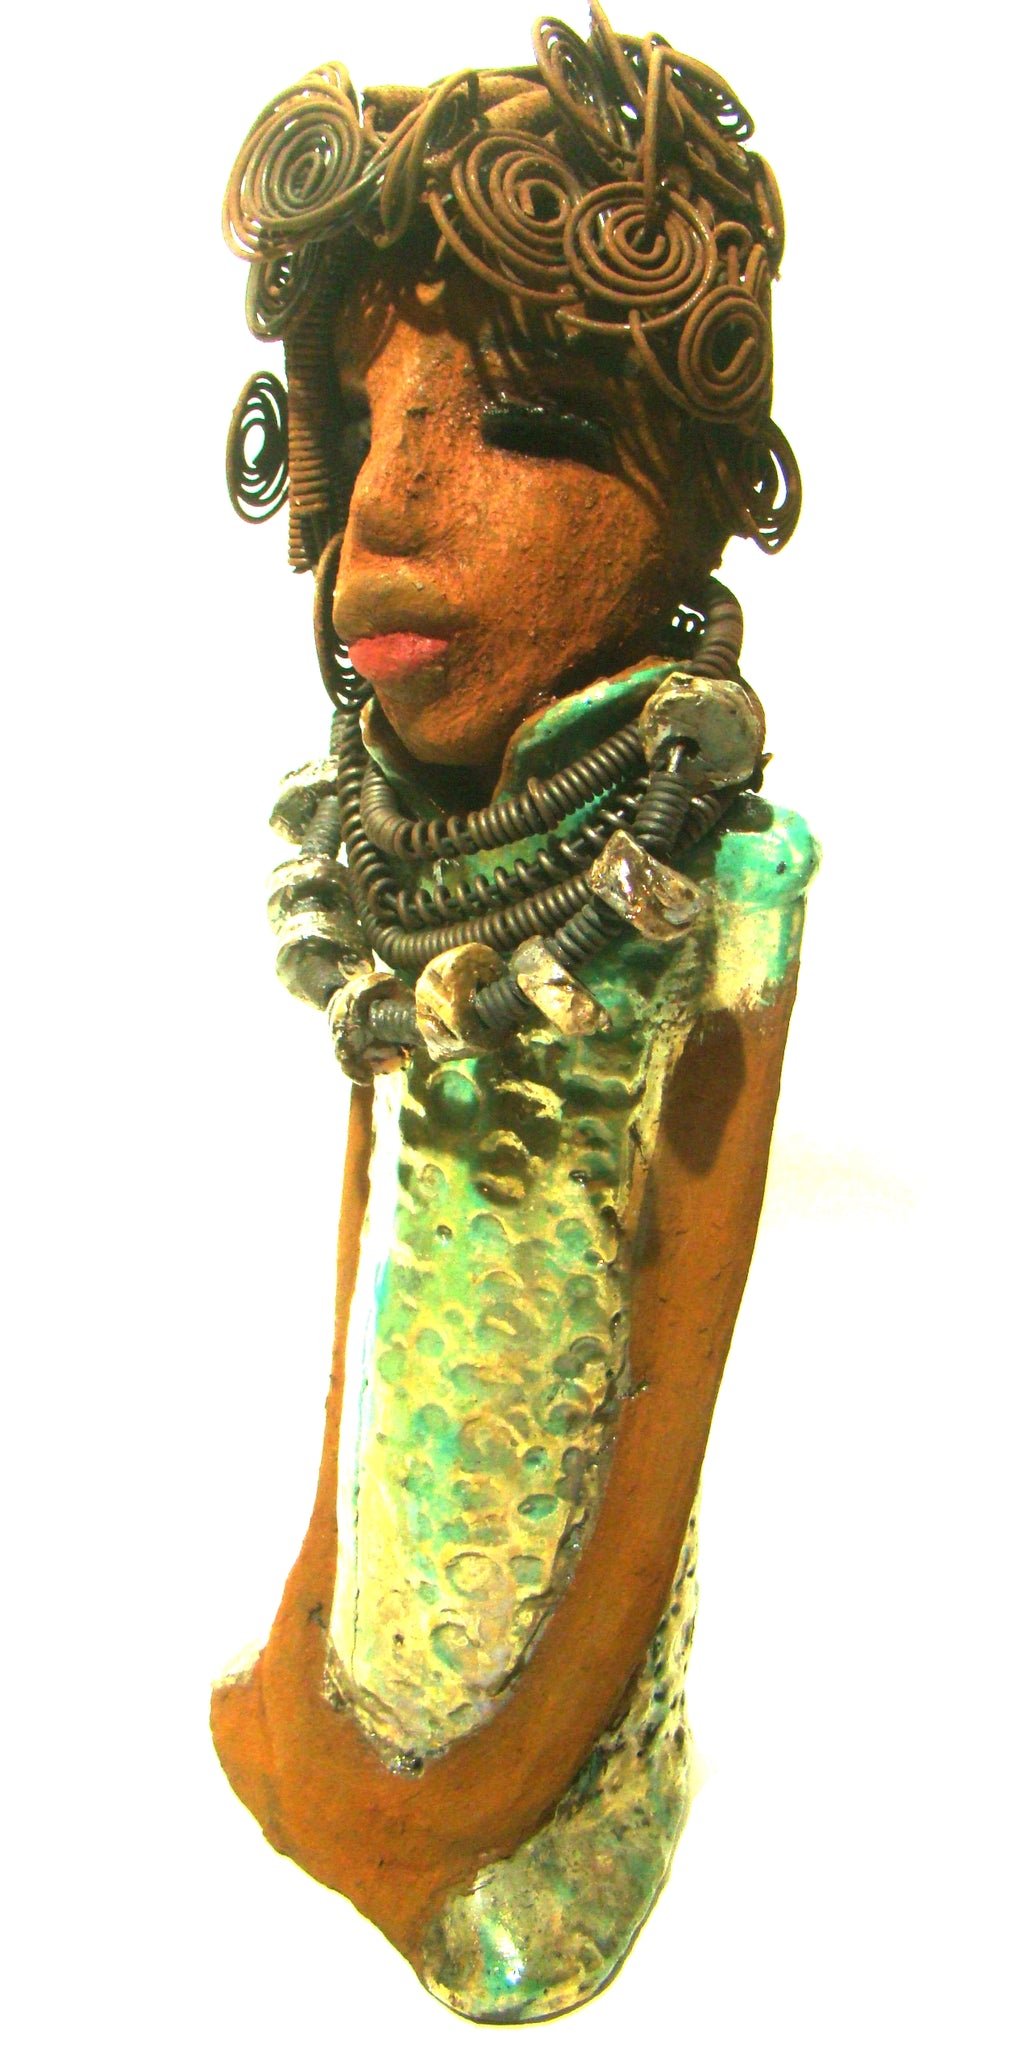 Martina stands 13" x 5" x 4" and weighs 3.15 lb. She wears a large beaded coiled collared necklace. Martina wears a metallic green gold textured dress. Martina has an awesome honey brown complexion that compliments her subdued look. She has those familiar long loving arms! Martina is looking for a new home. She is a conversation piece. Free Shipping!